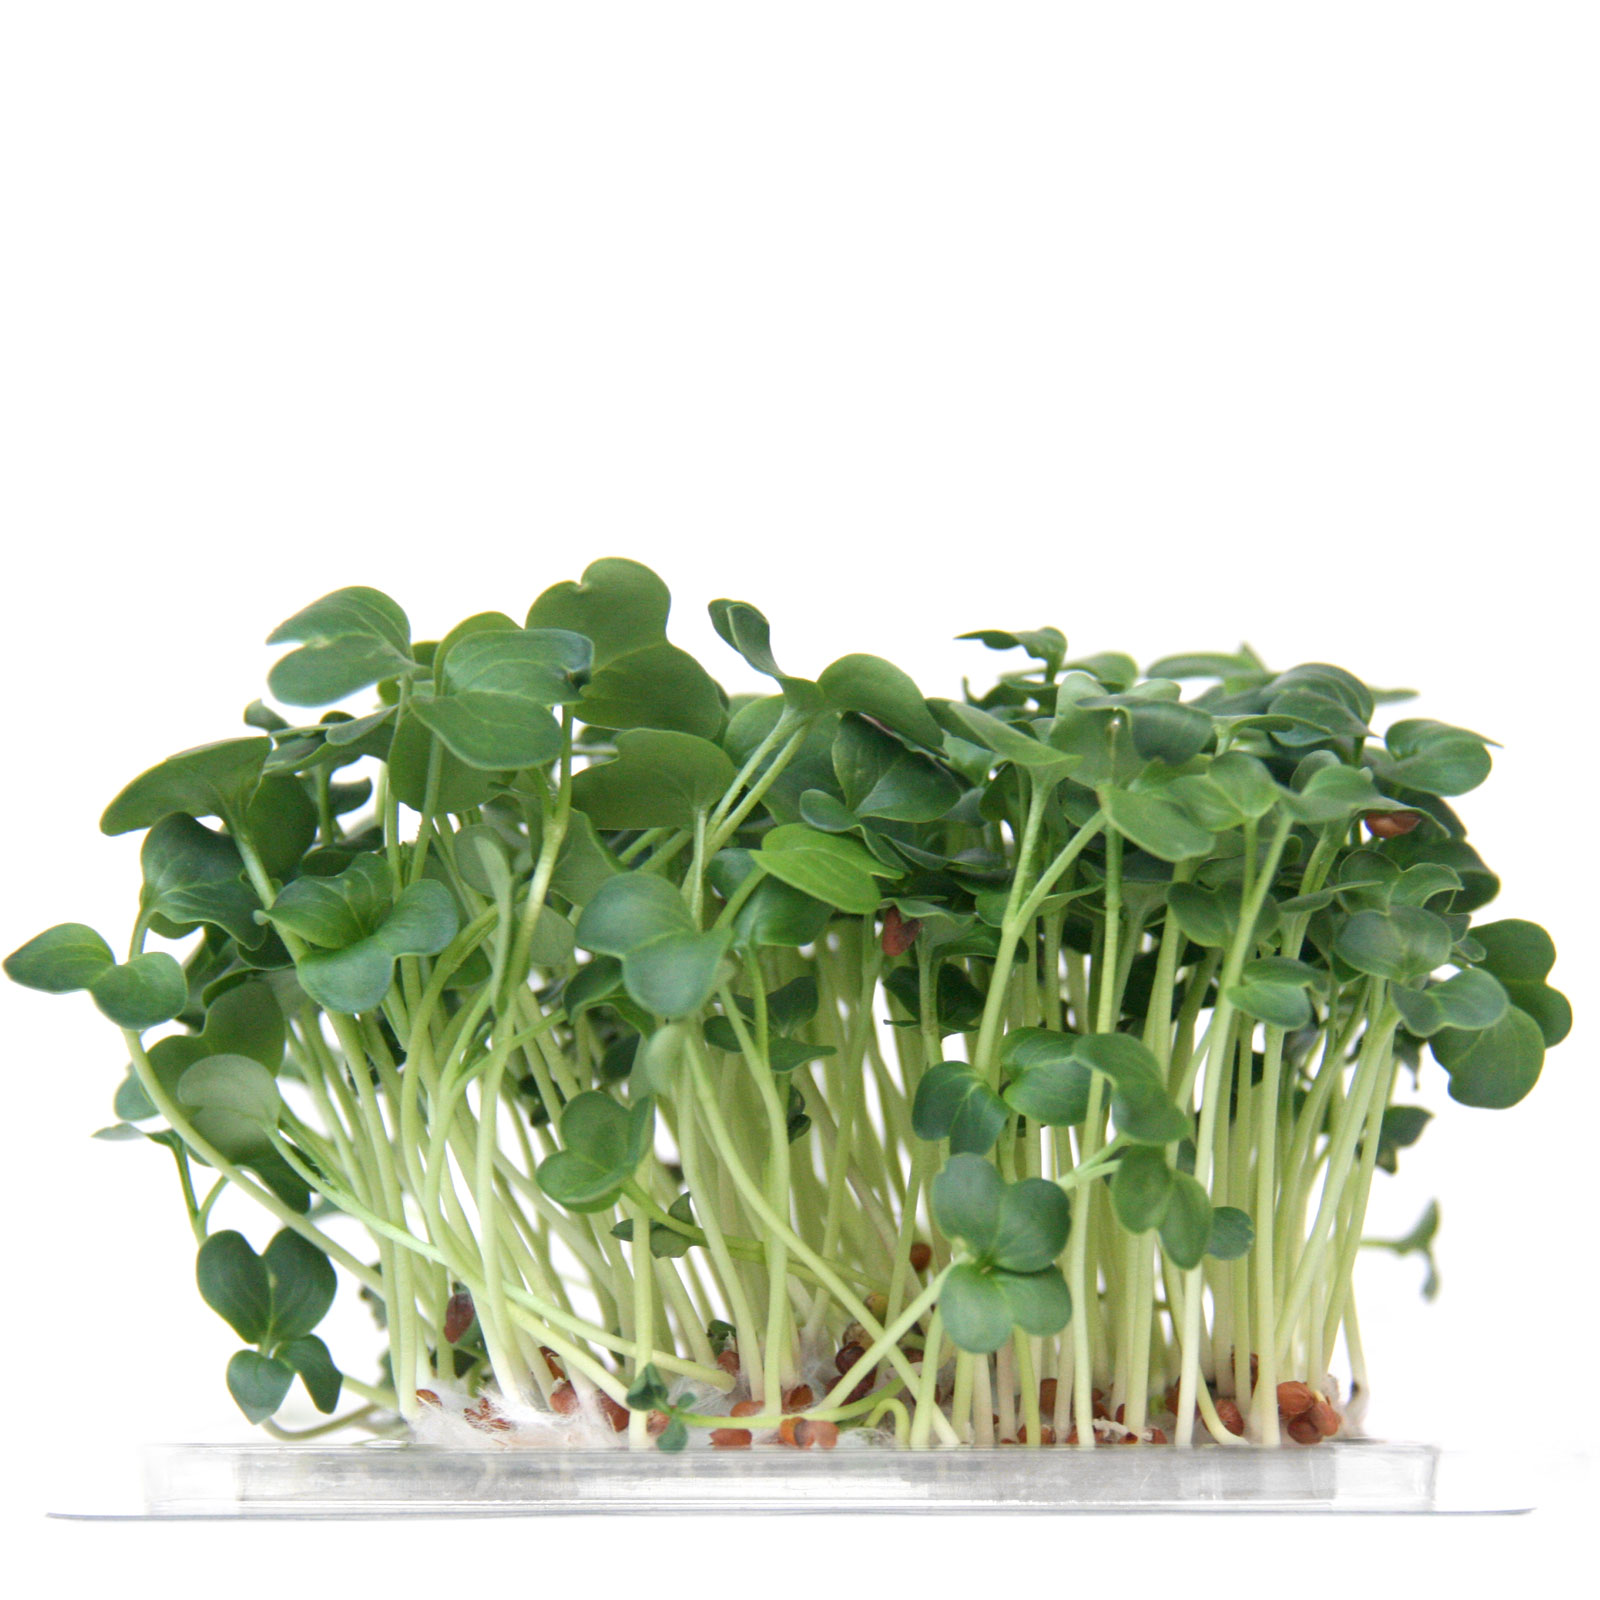 InstaGreen Microgreen cup with Green Daikon